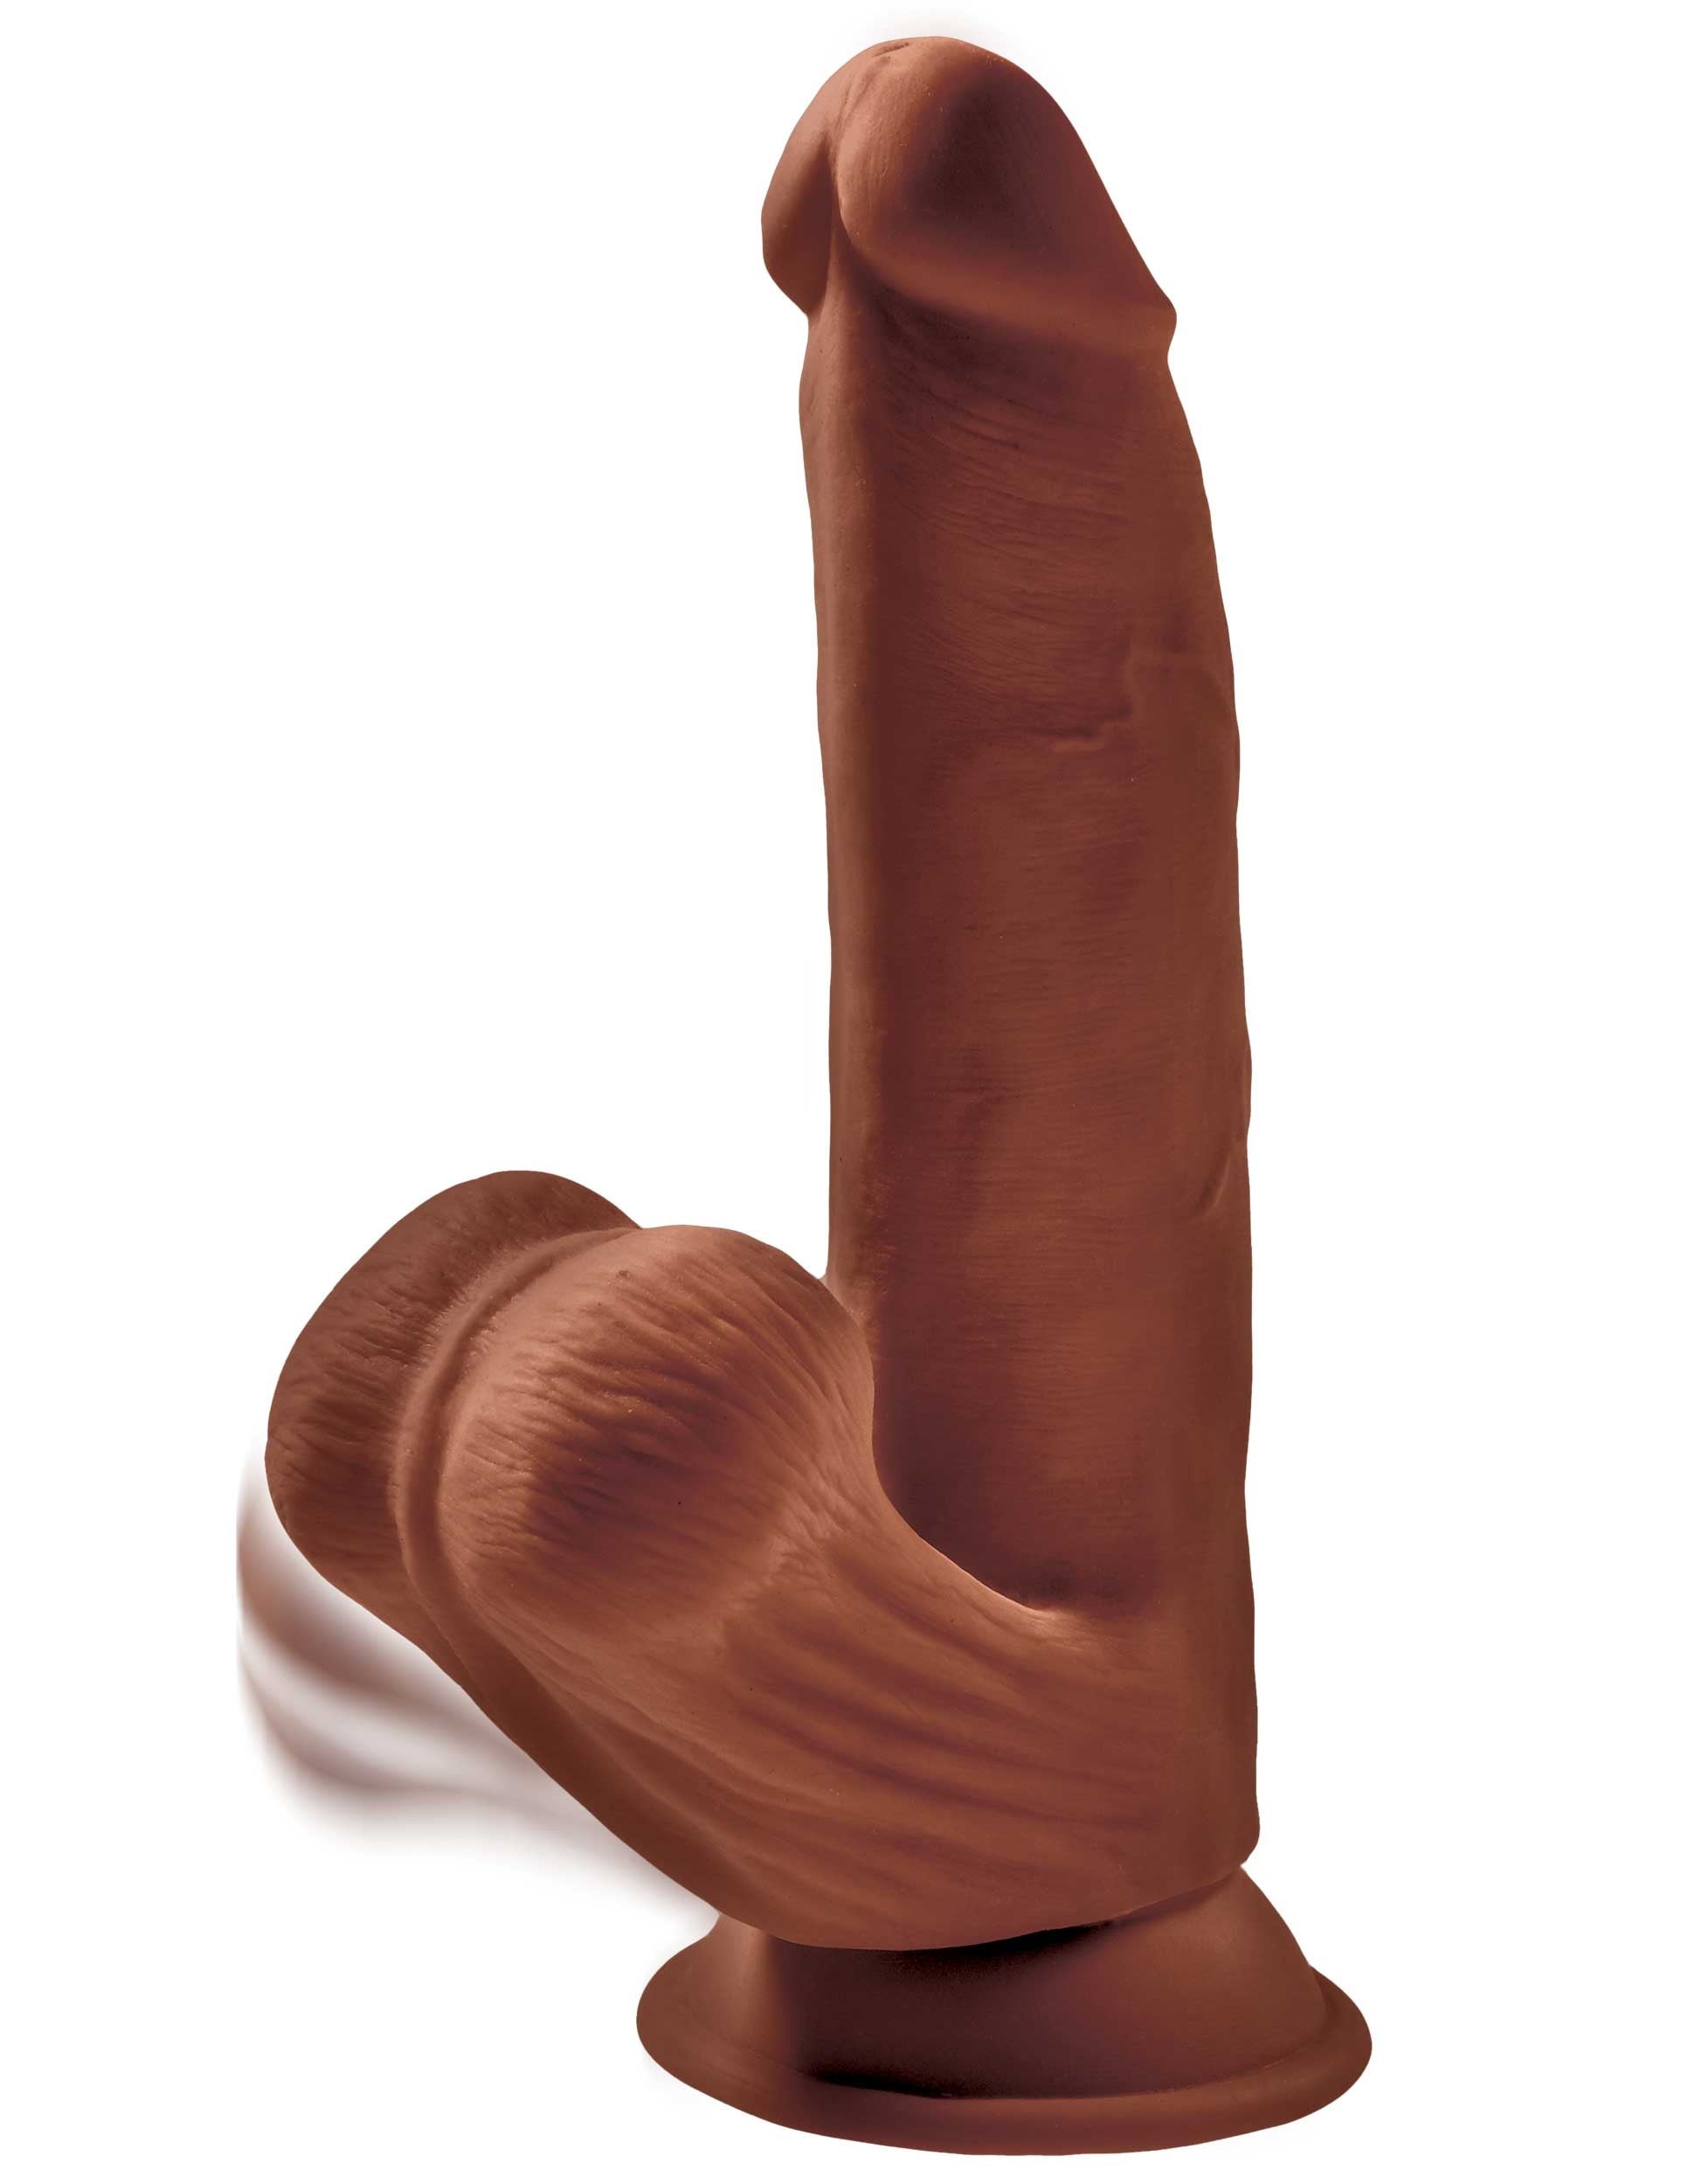 8 Inch Triple Density Cock With Swinging Balls -  Brown-5